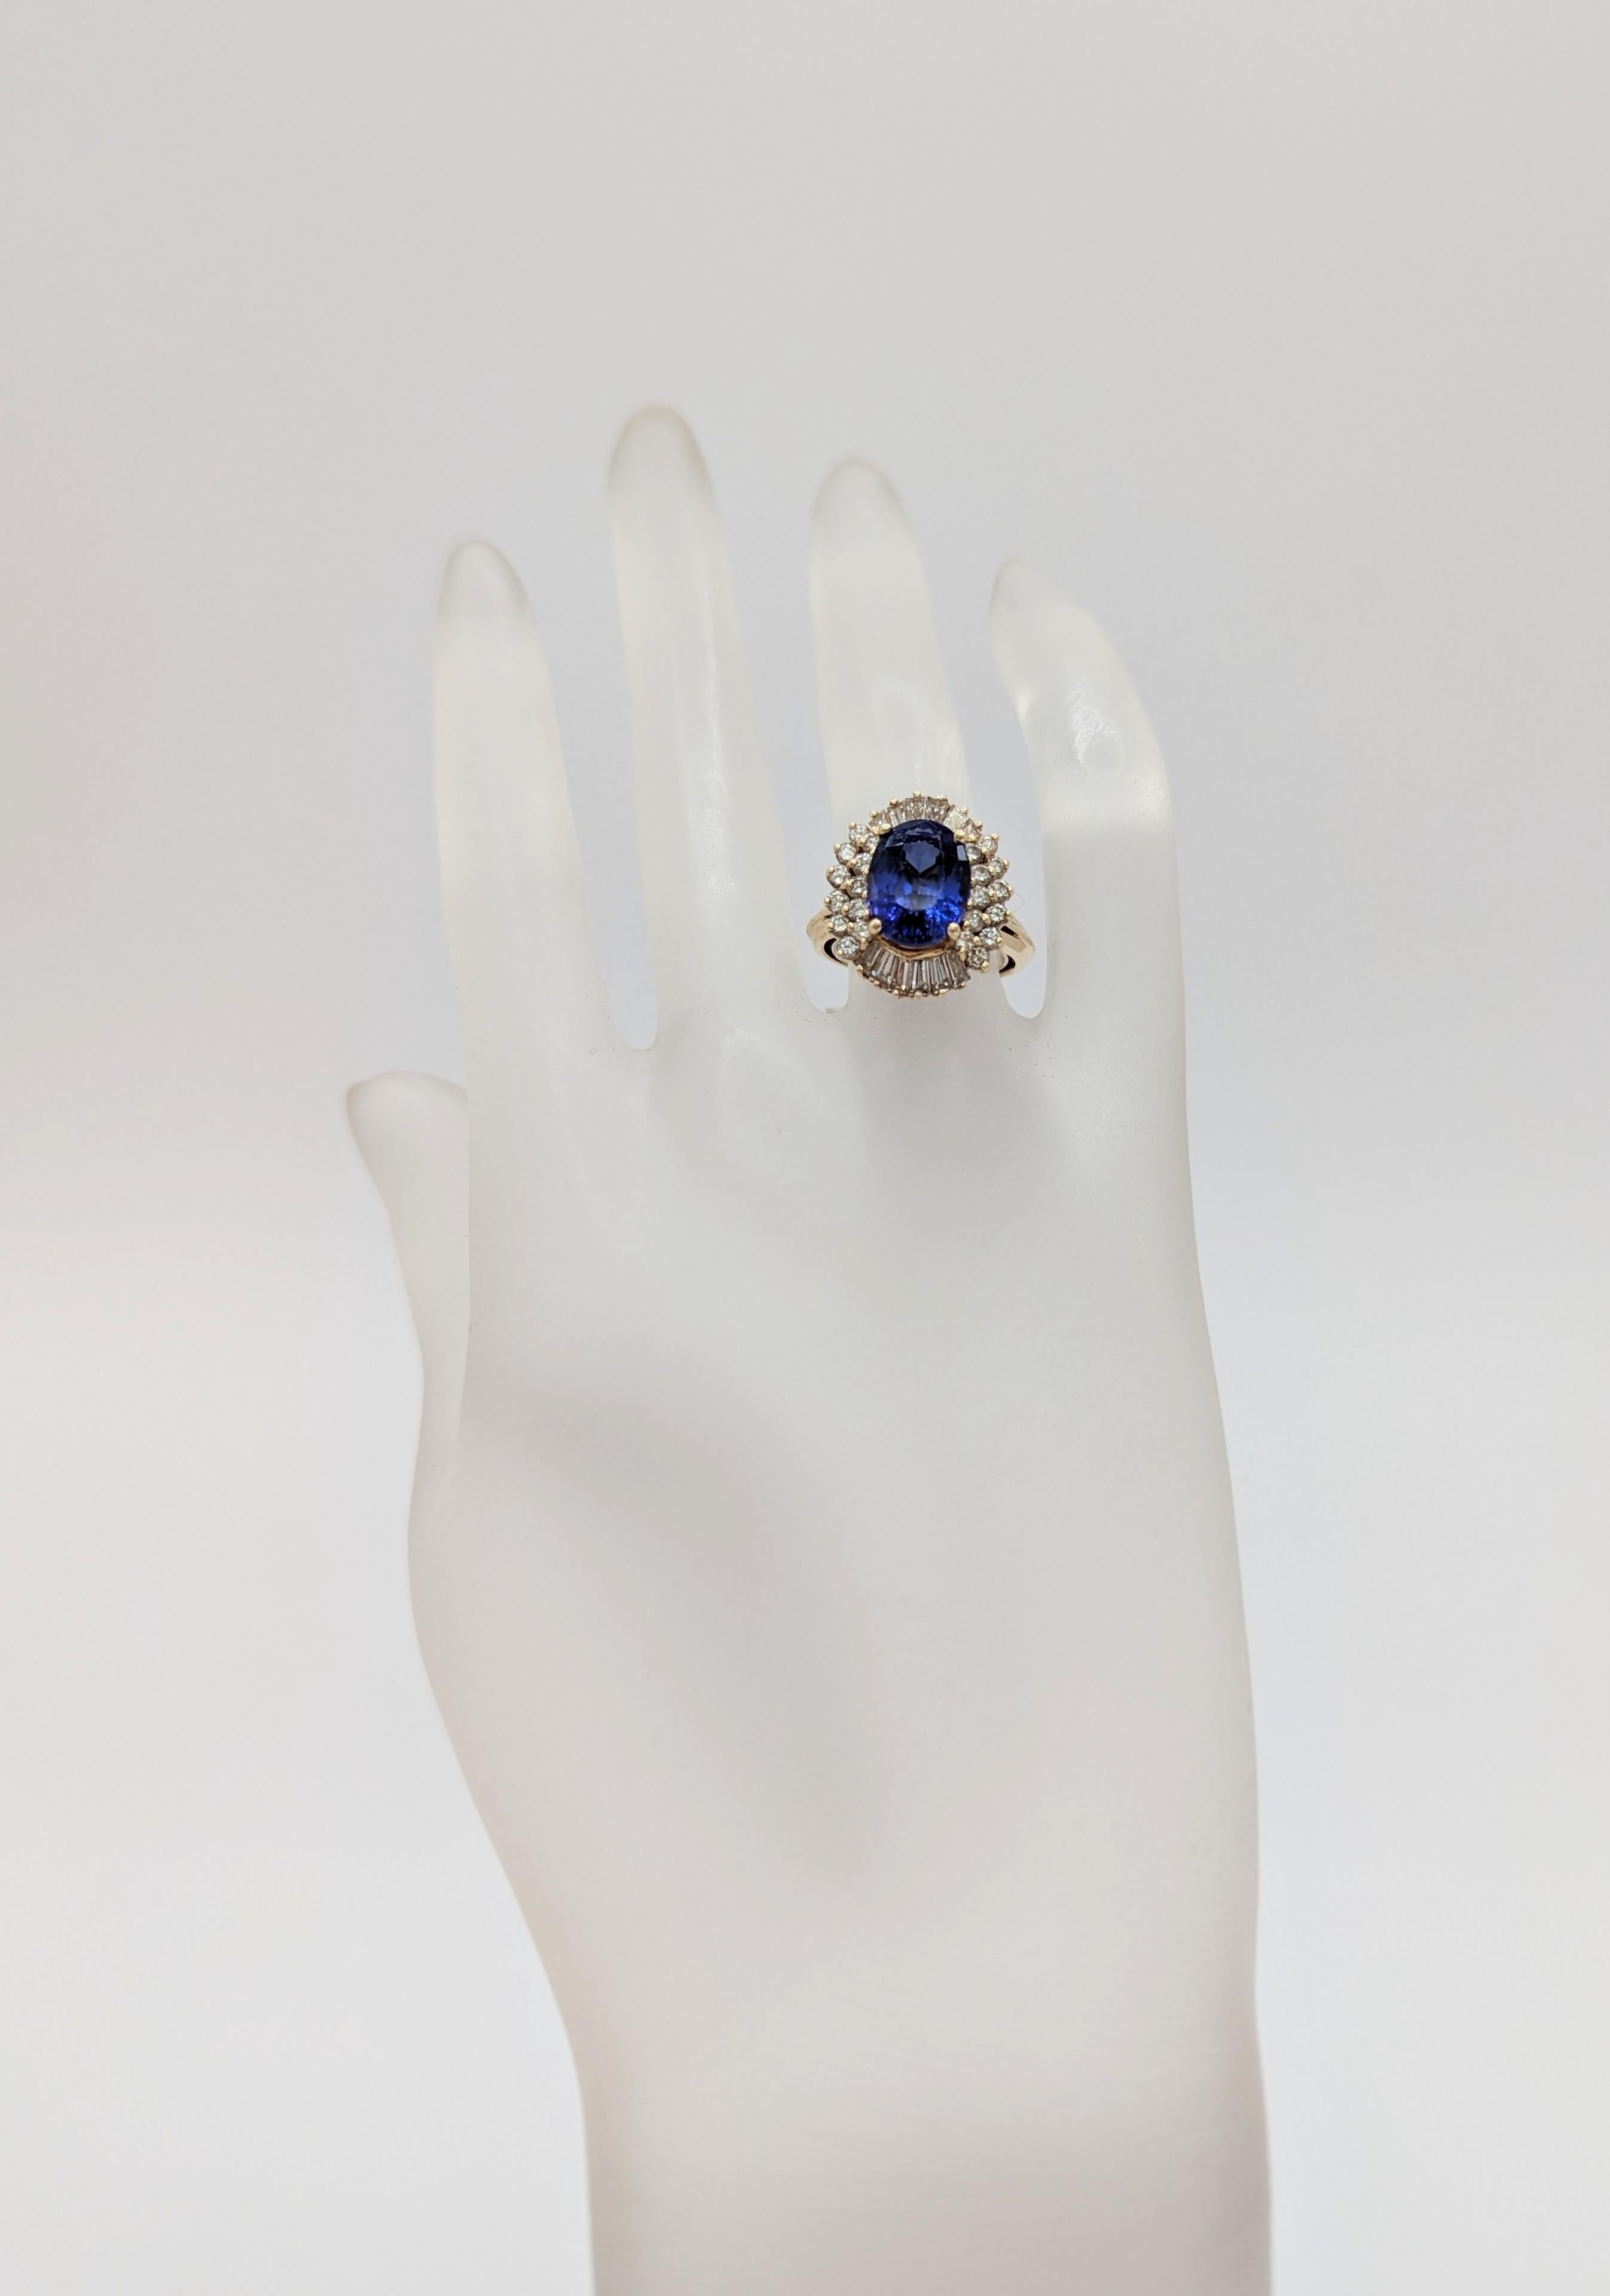 Oval Cut Tanzanite and White Diamond Cocktail Ring in 14K Yellow Gold